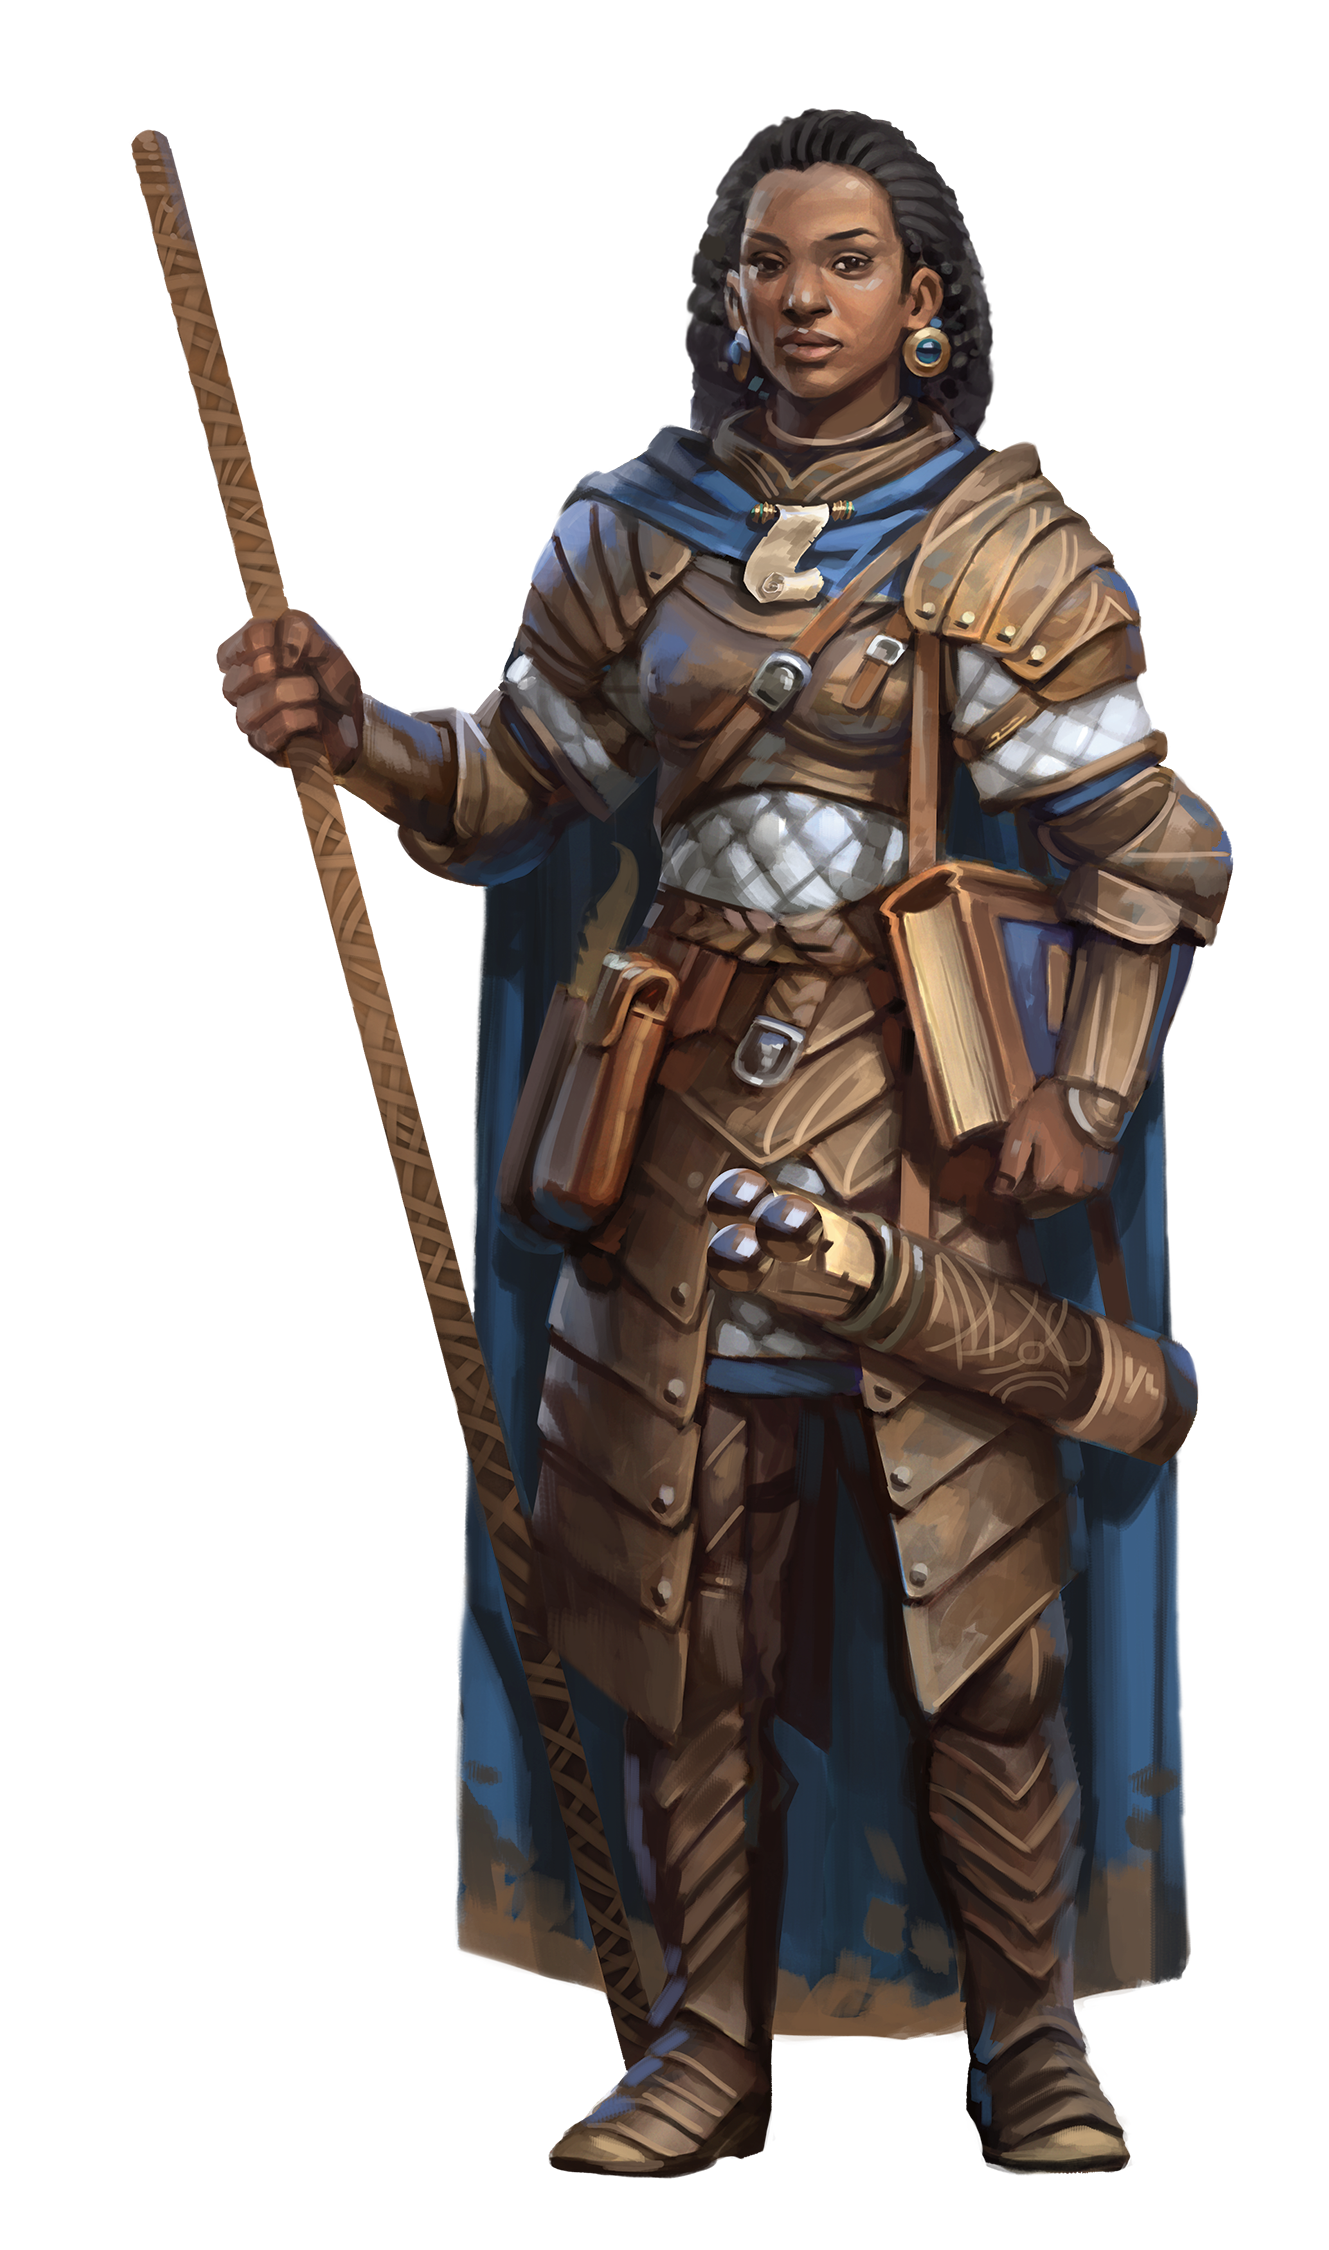 Dungeons and Dragons character wearing armor